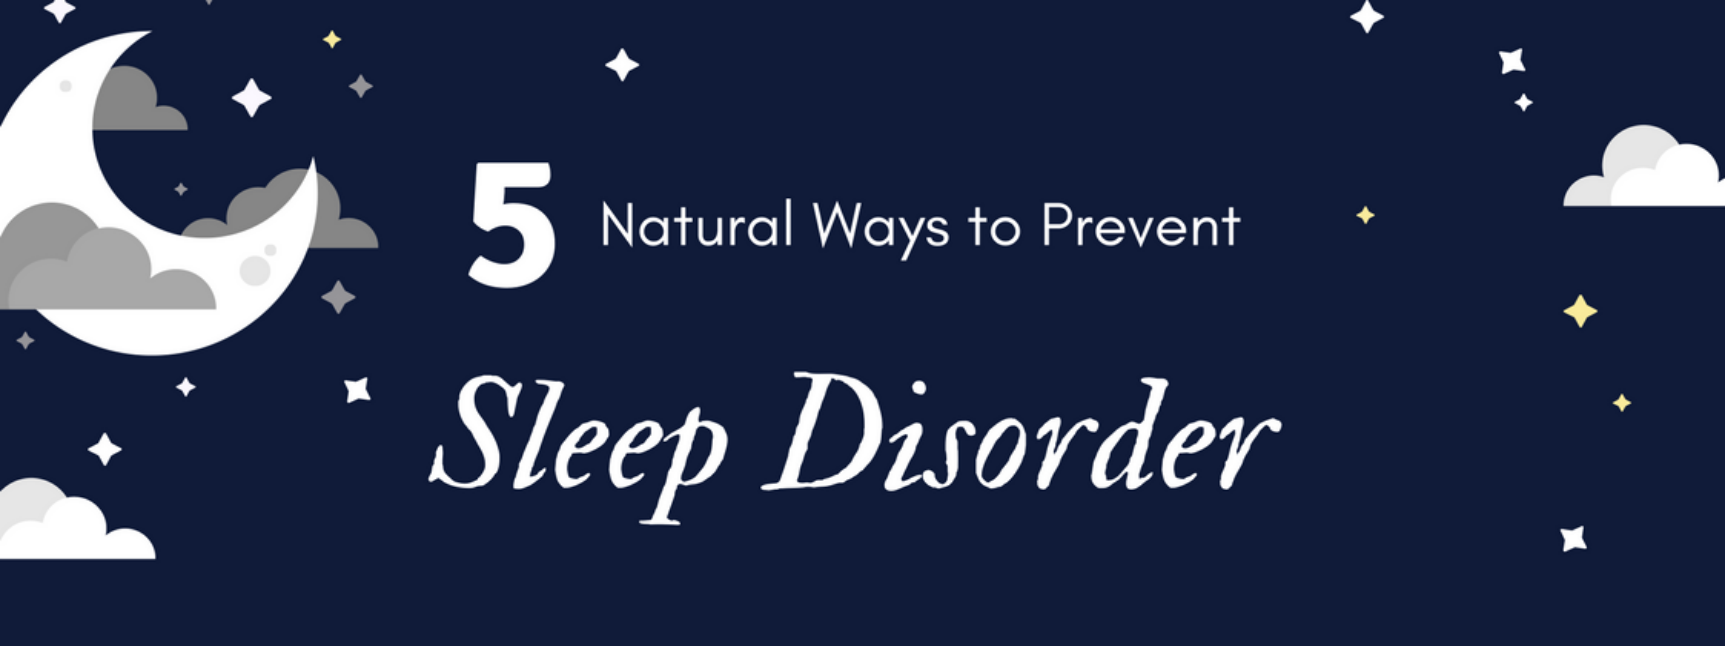 5 Natural Ways to Prevent Sleep Disorder (Infographic)